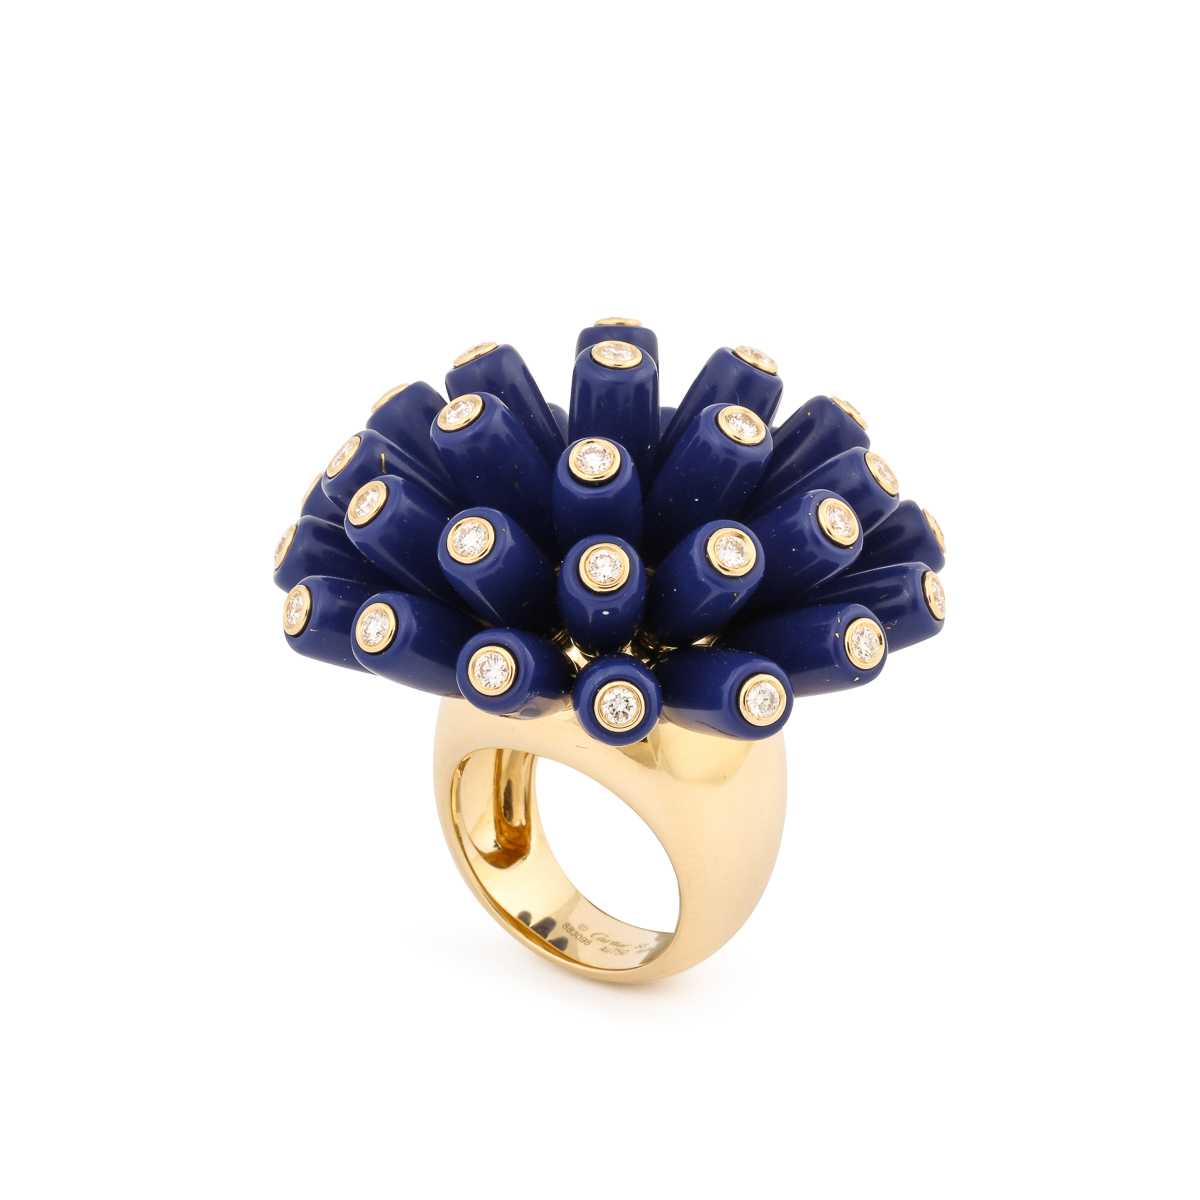 gold ring set with long lapis beads, each topped with a diamond